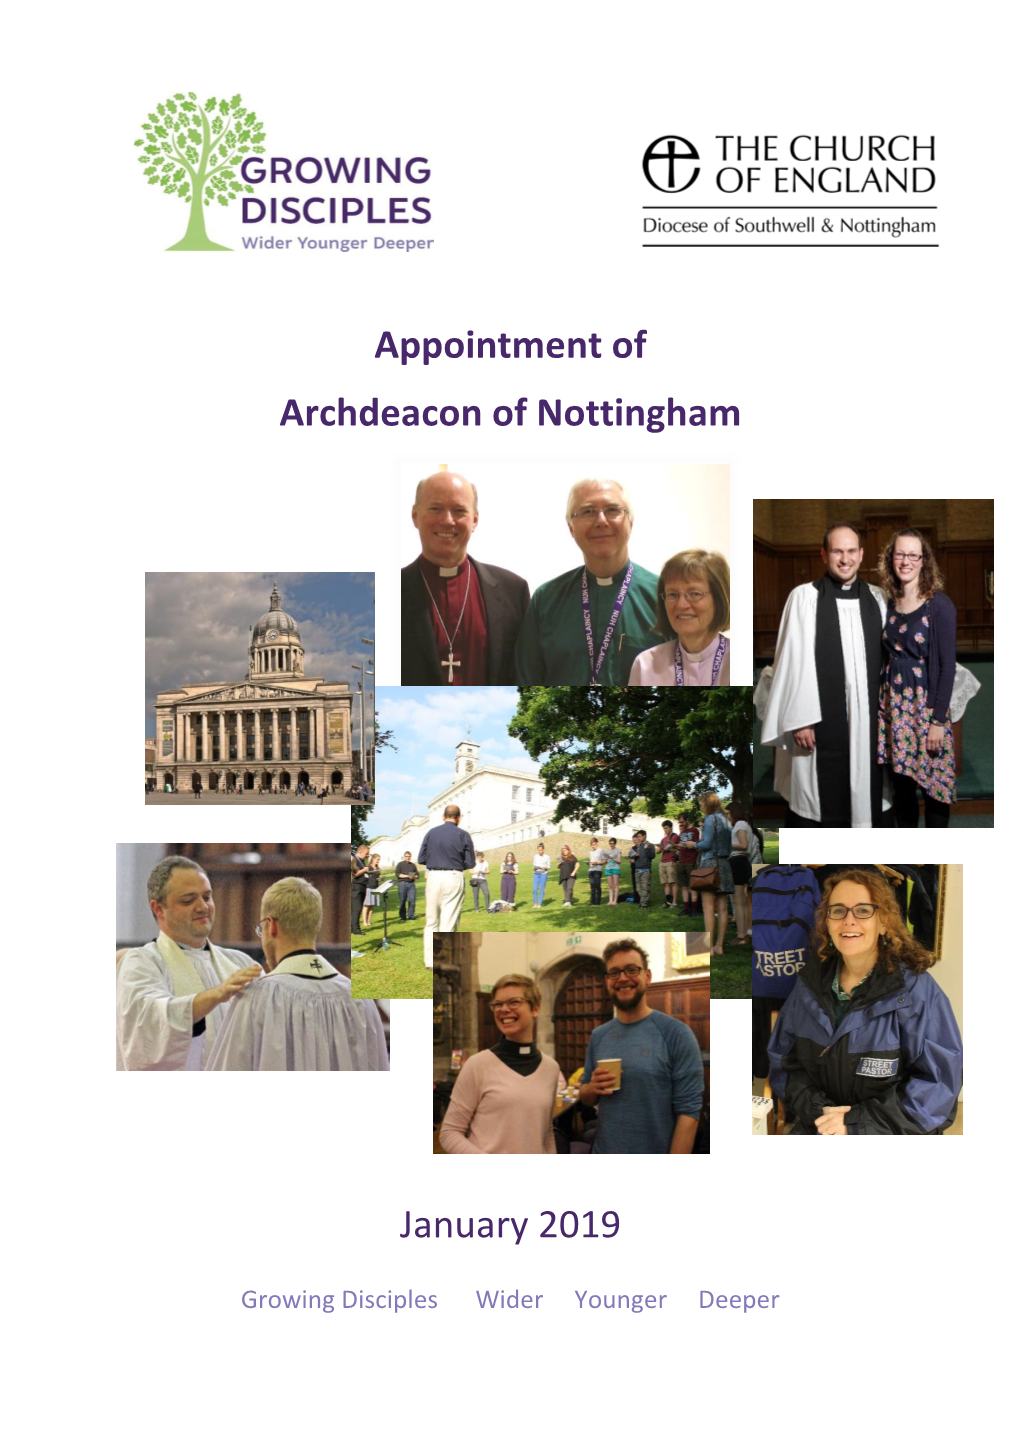 Appointment of Archdeacon of Nottingham January 2019